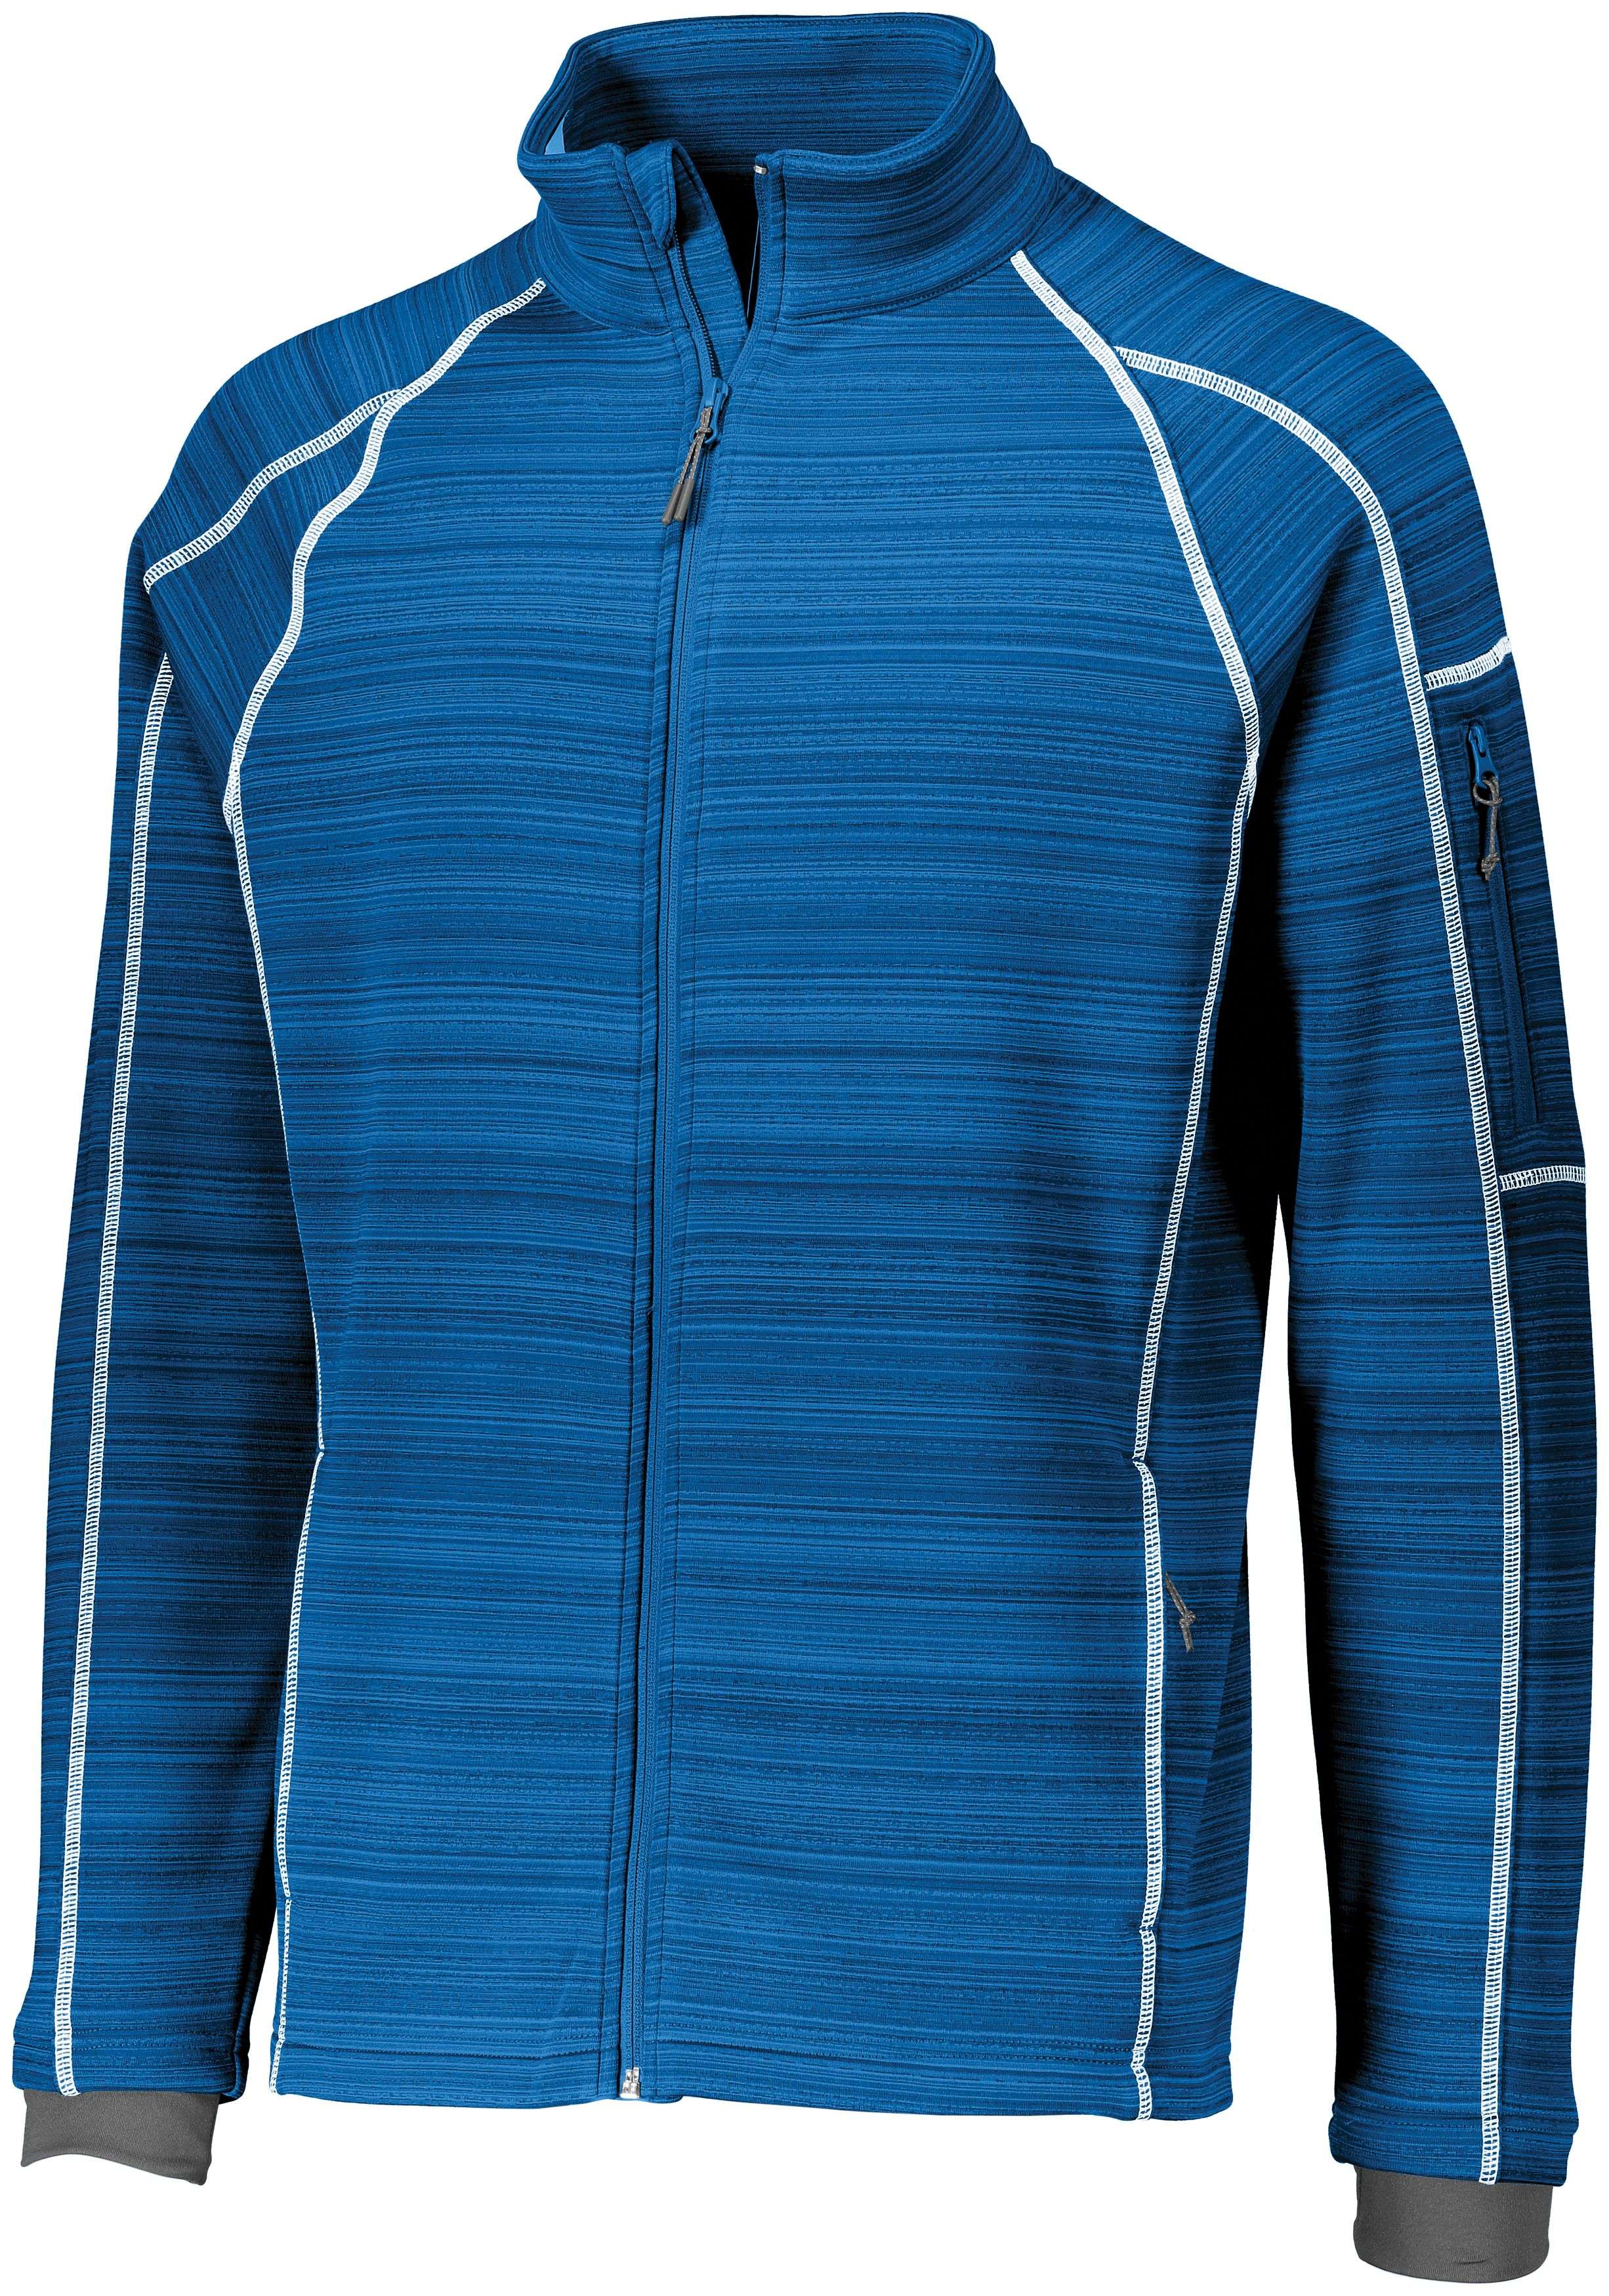 HOLLOWAY 229539 Mens Long Sleeve Moisture Wicking Deviate Jacket With Pockets